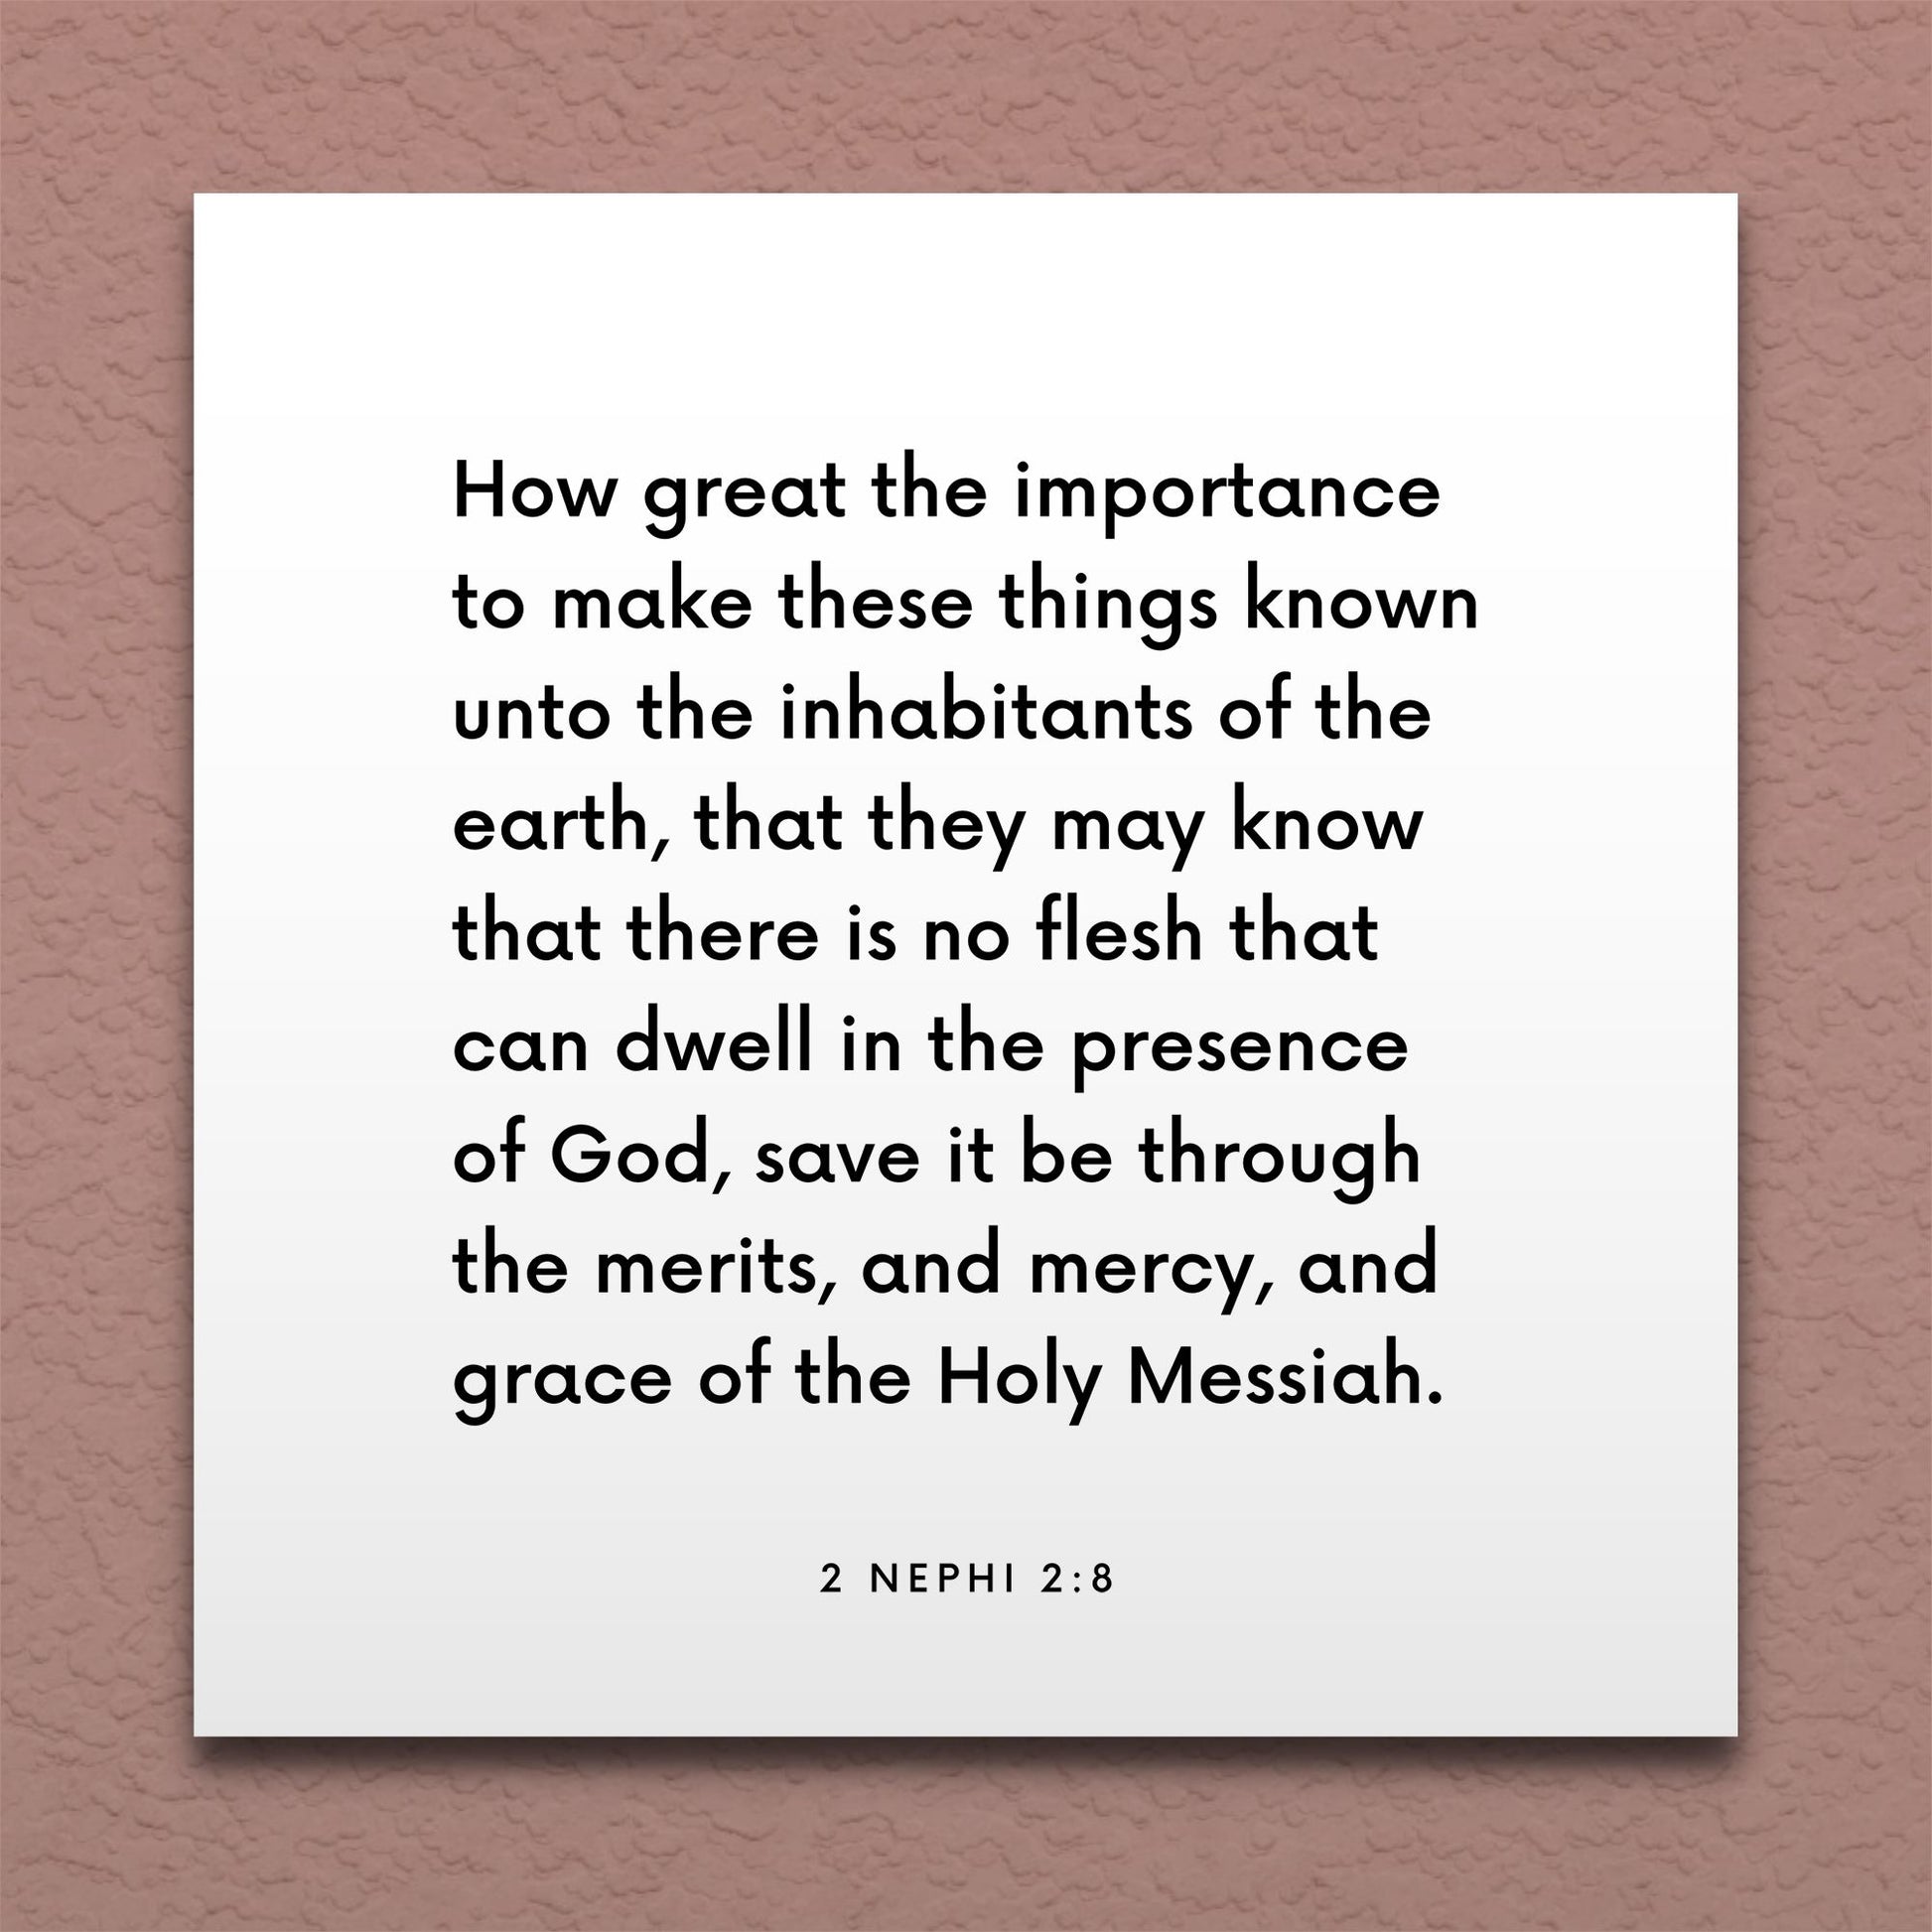 Wall-mounted scripture tile for 2 Nephi 2:8 - "How great the importance to make these things known"